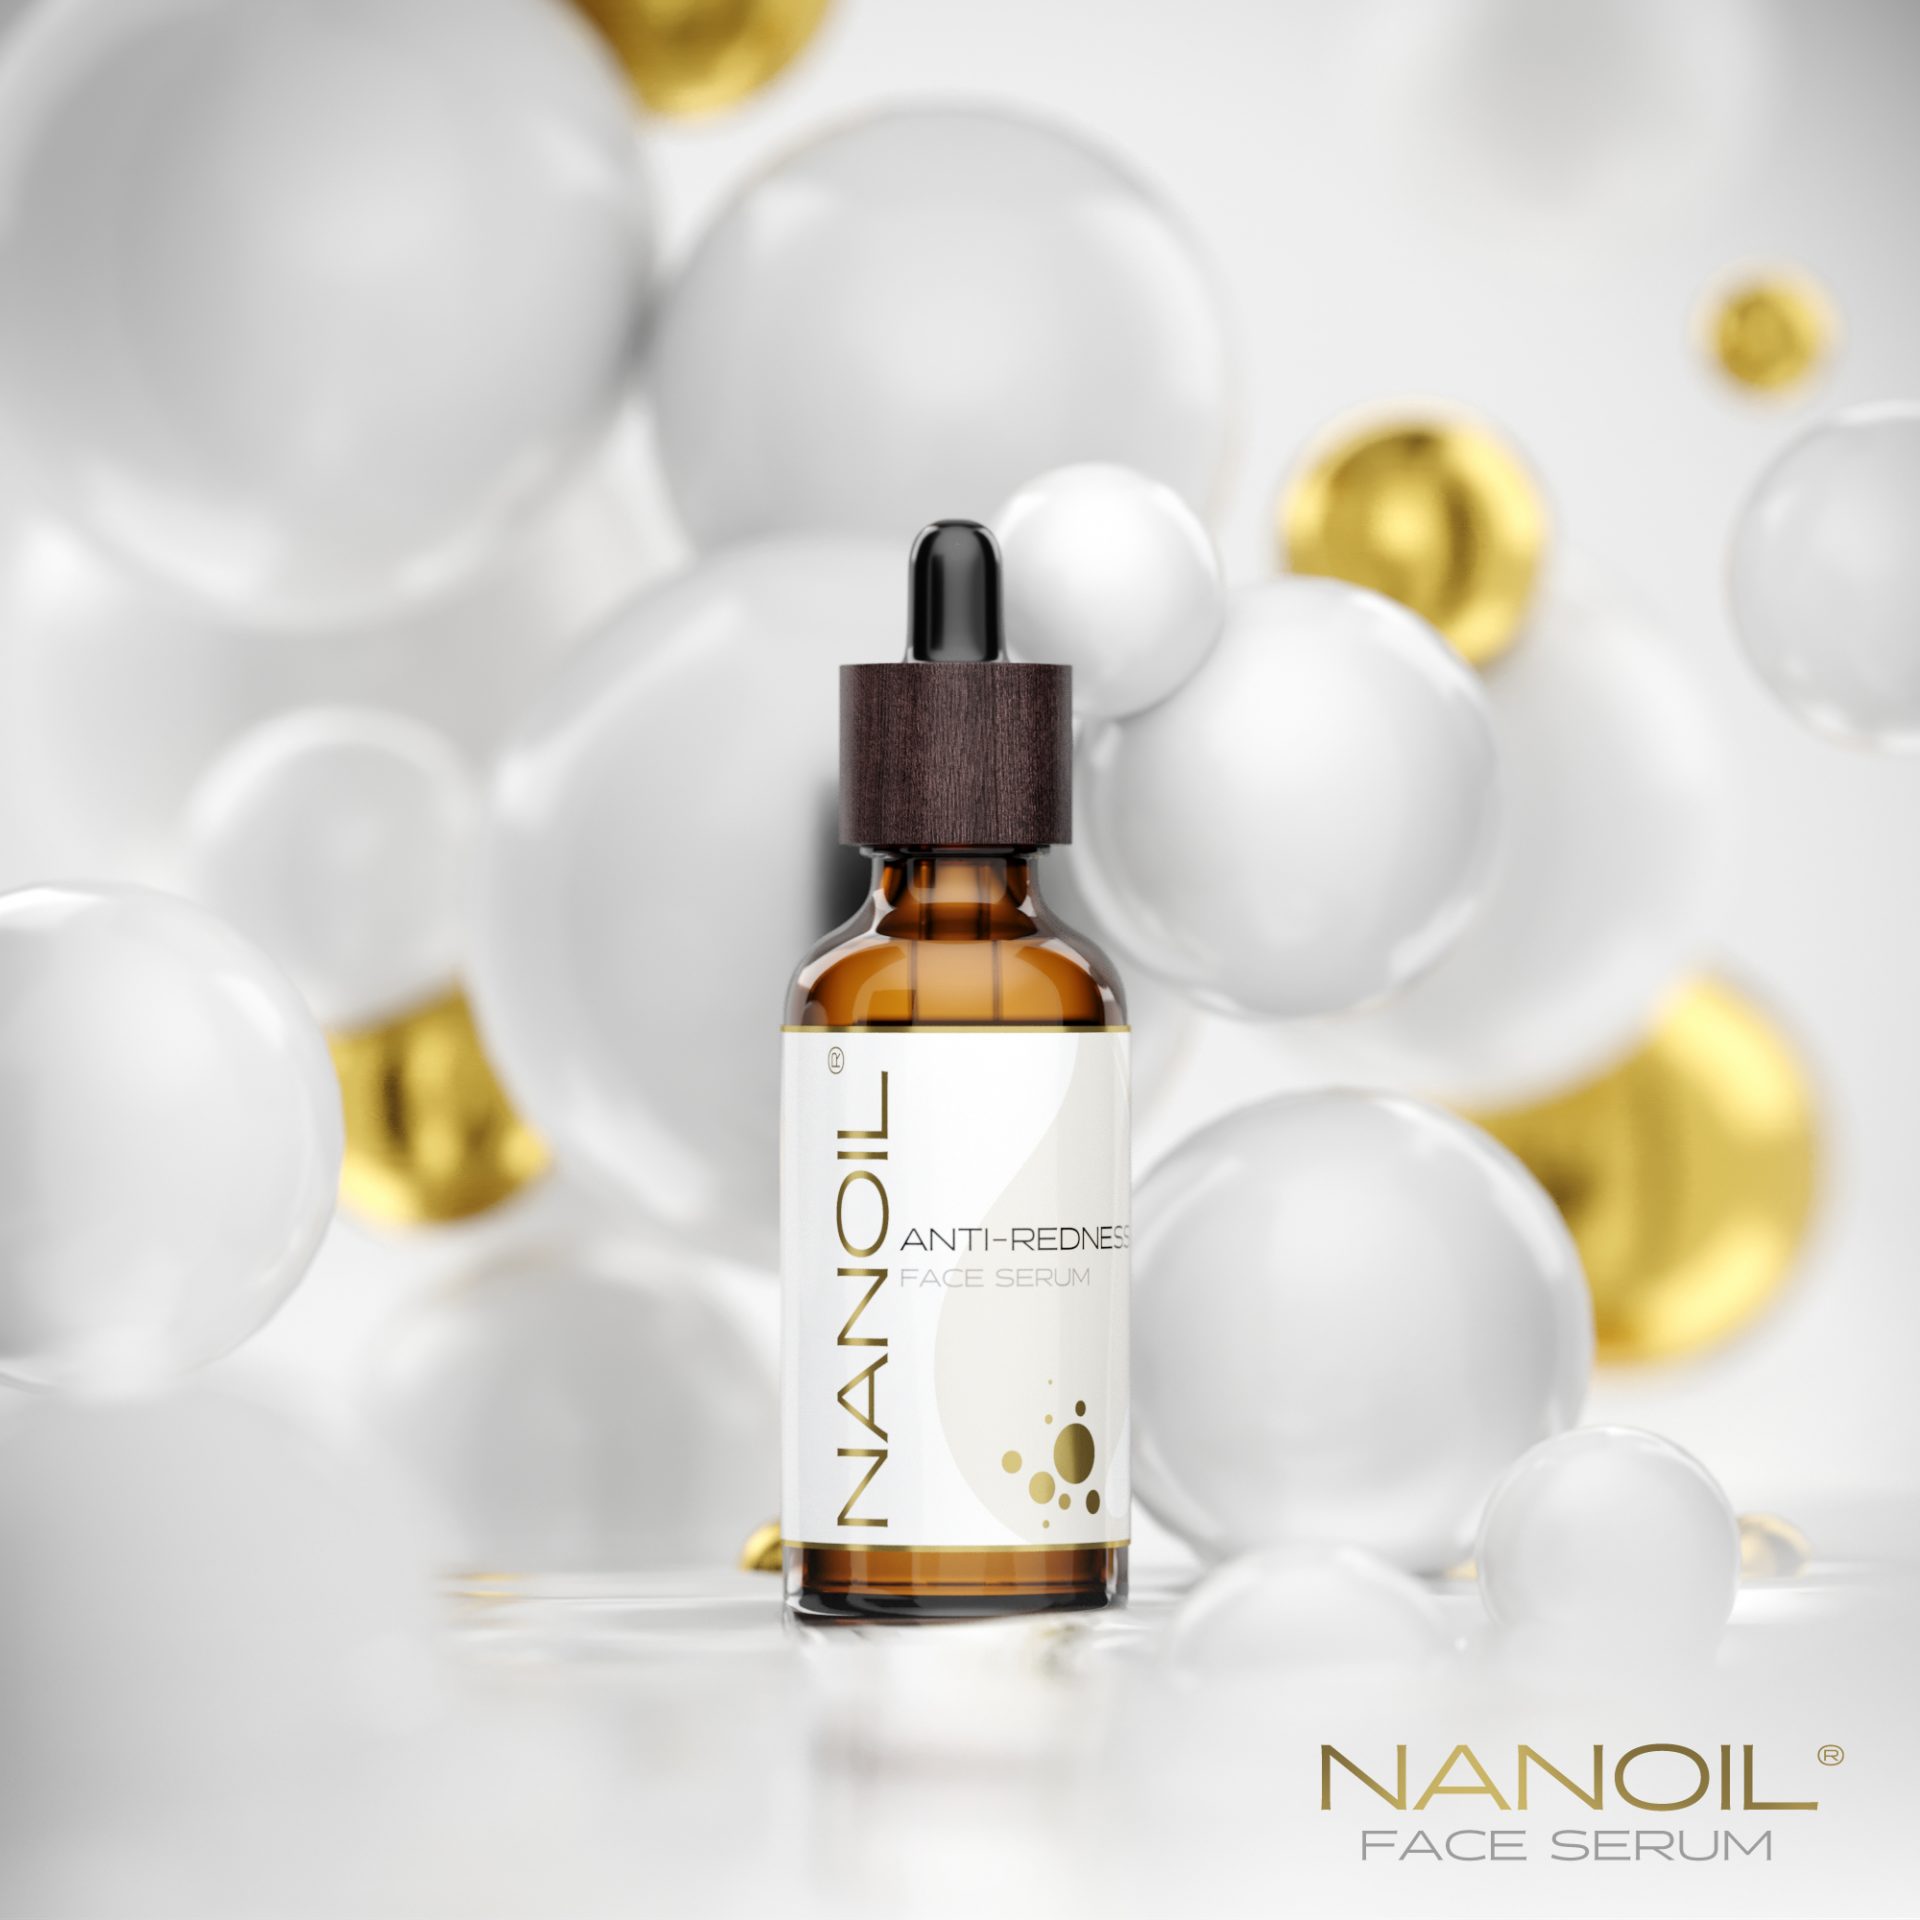 Redness-Reduction Face Treatment from Nanoil: Usage, Results & Reviews